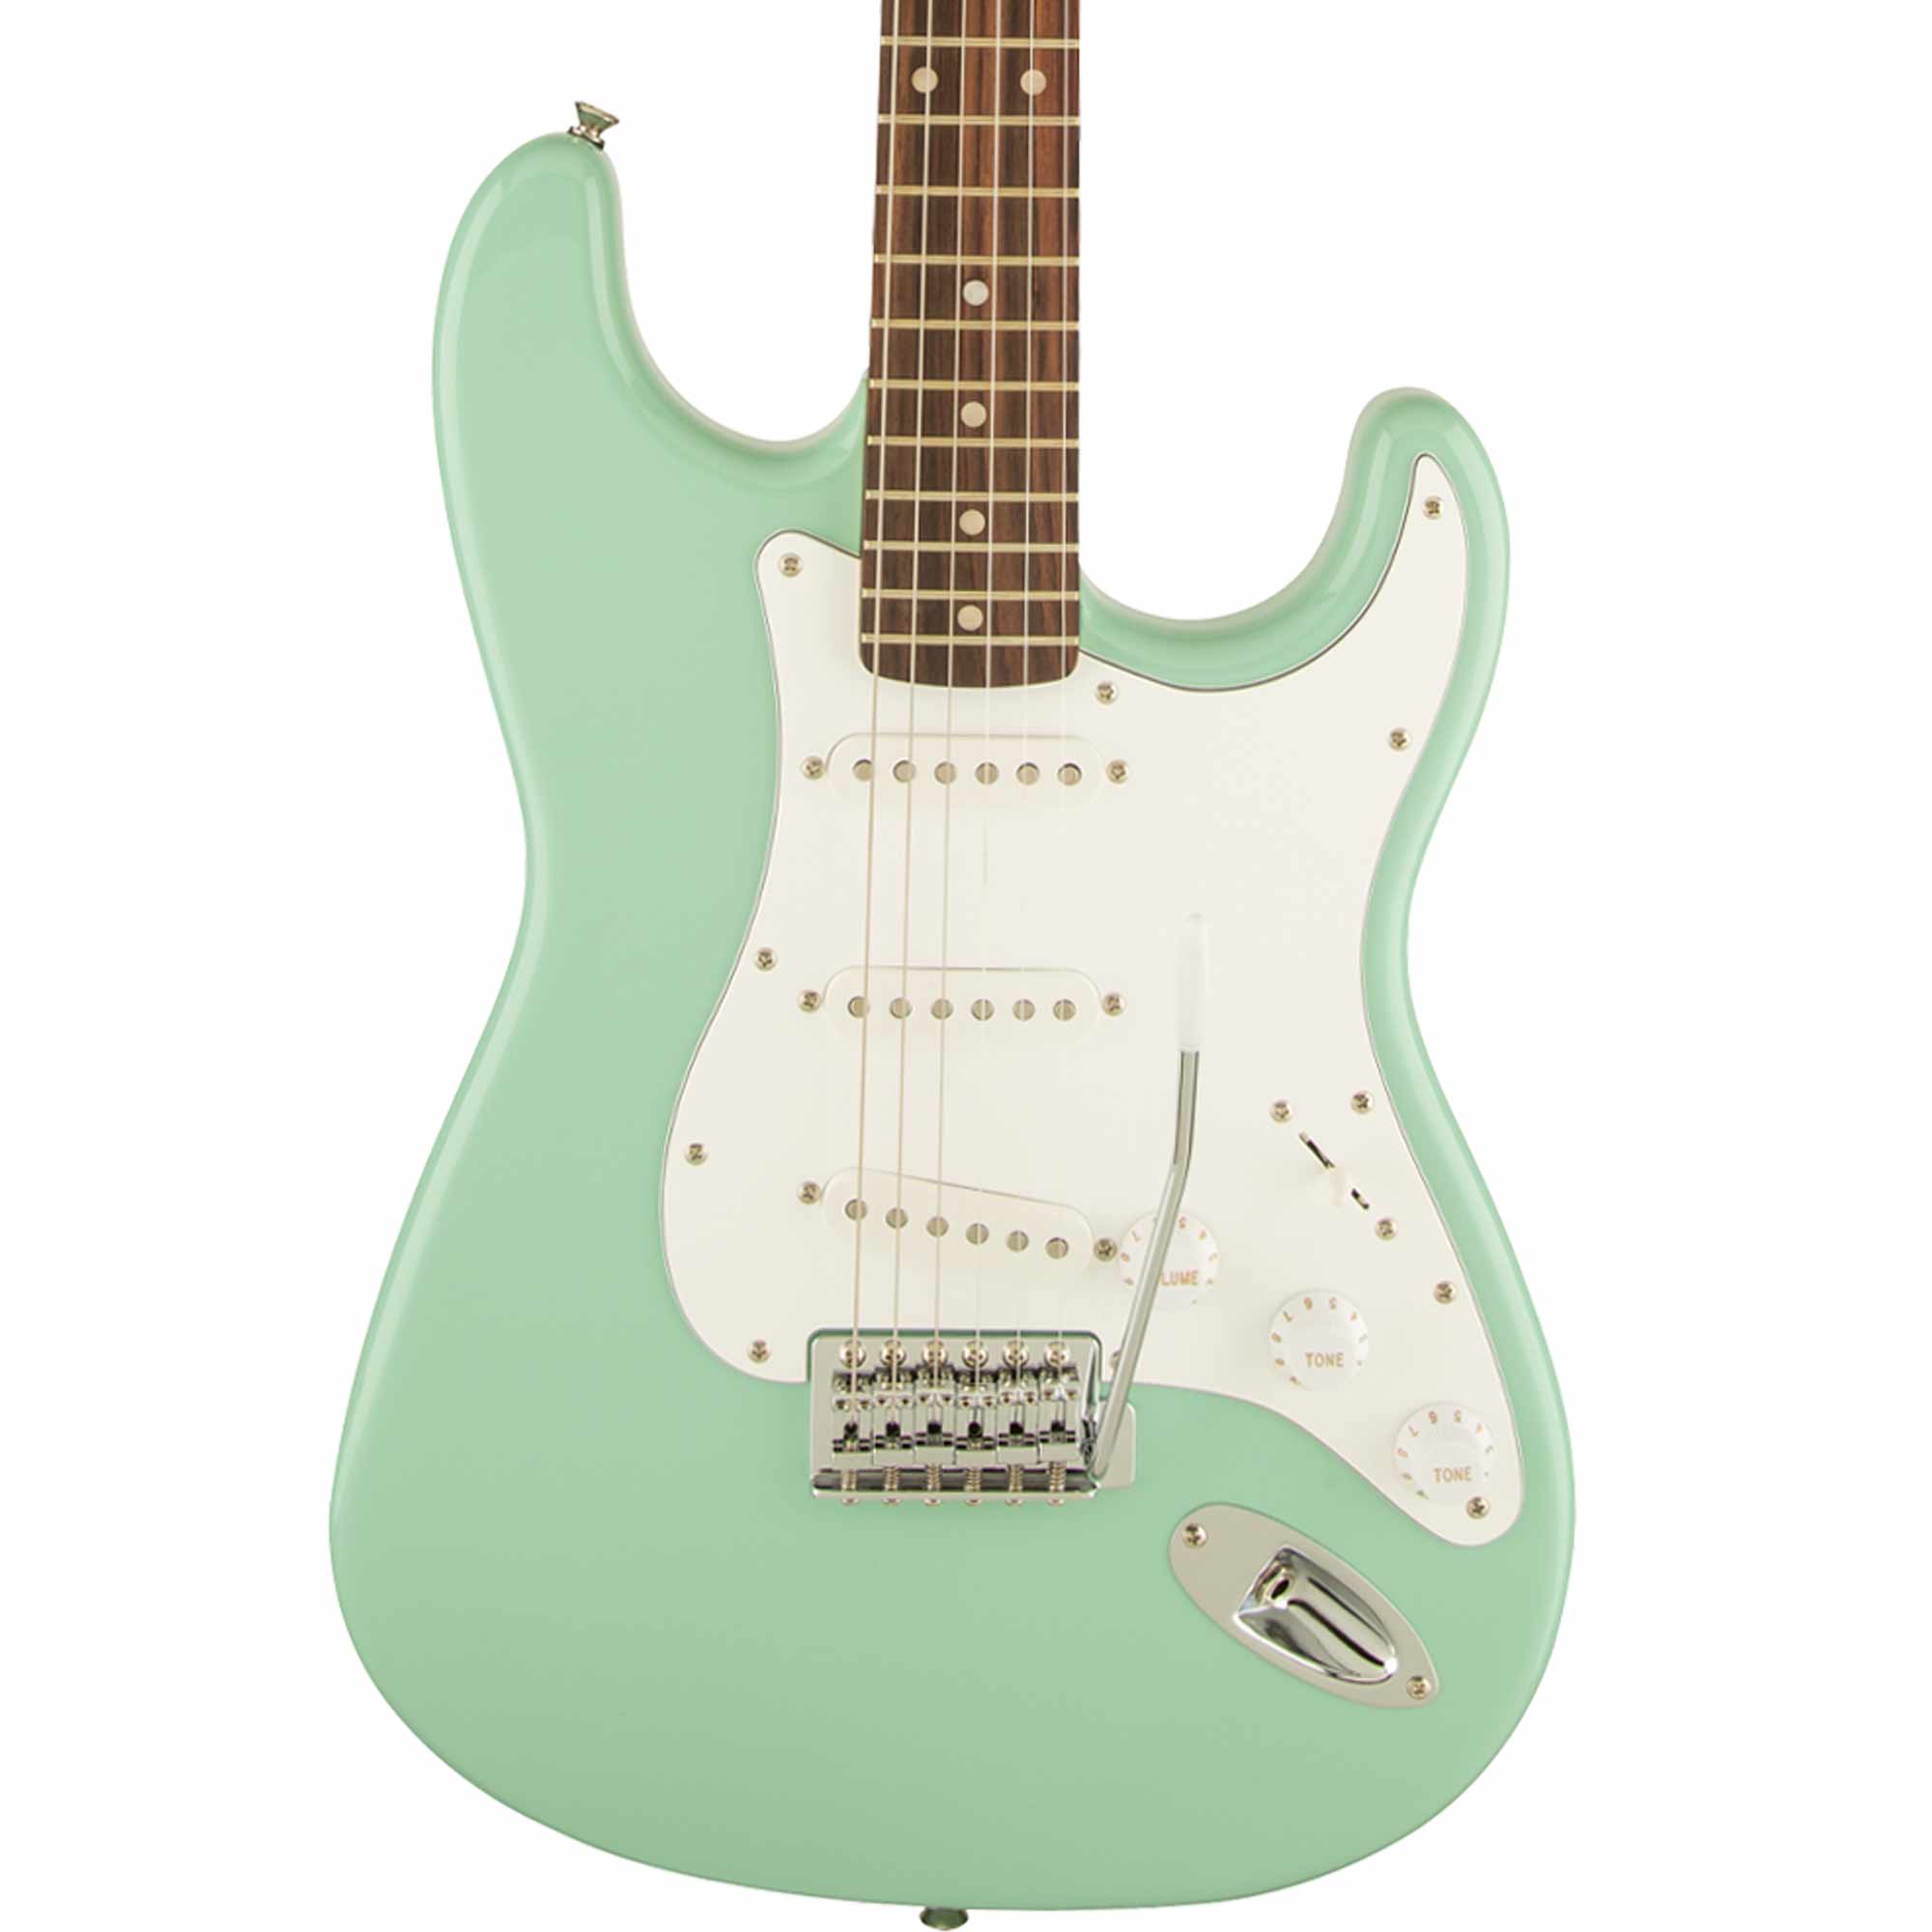 Fawley Music - Squier Affinity Stratocaster Surf Green